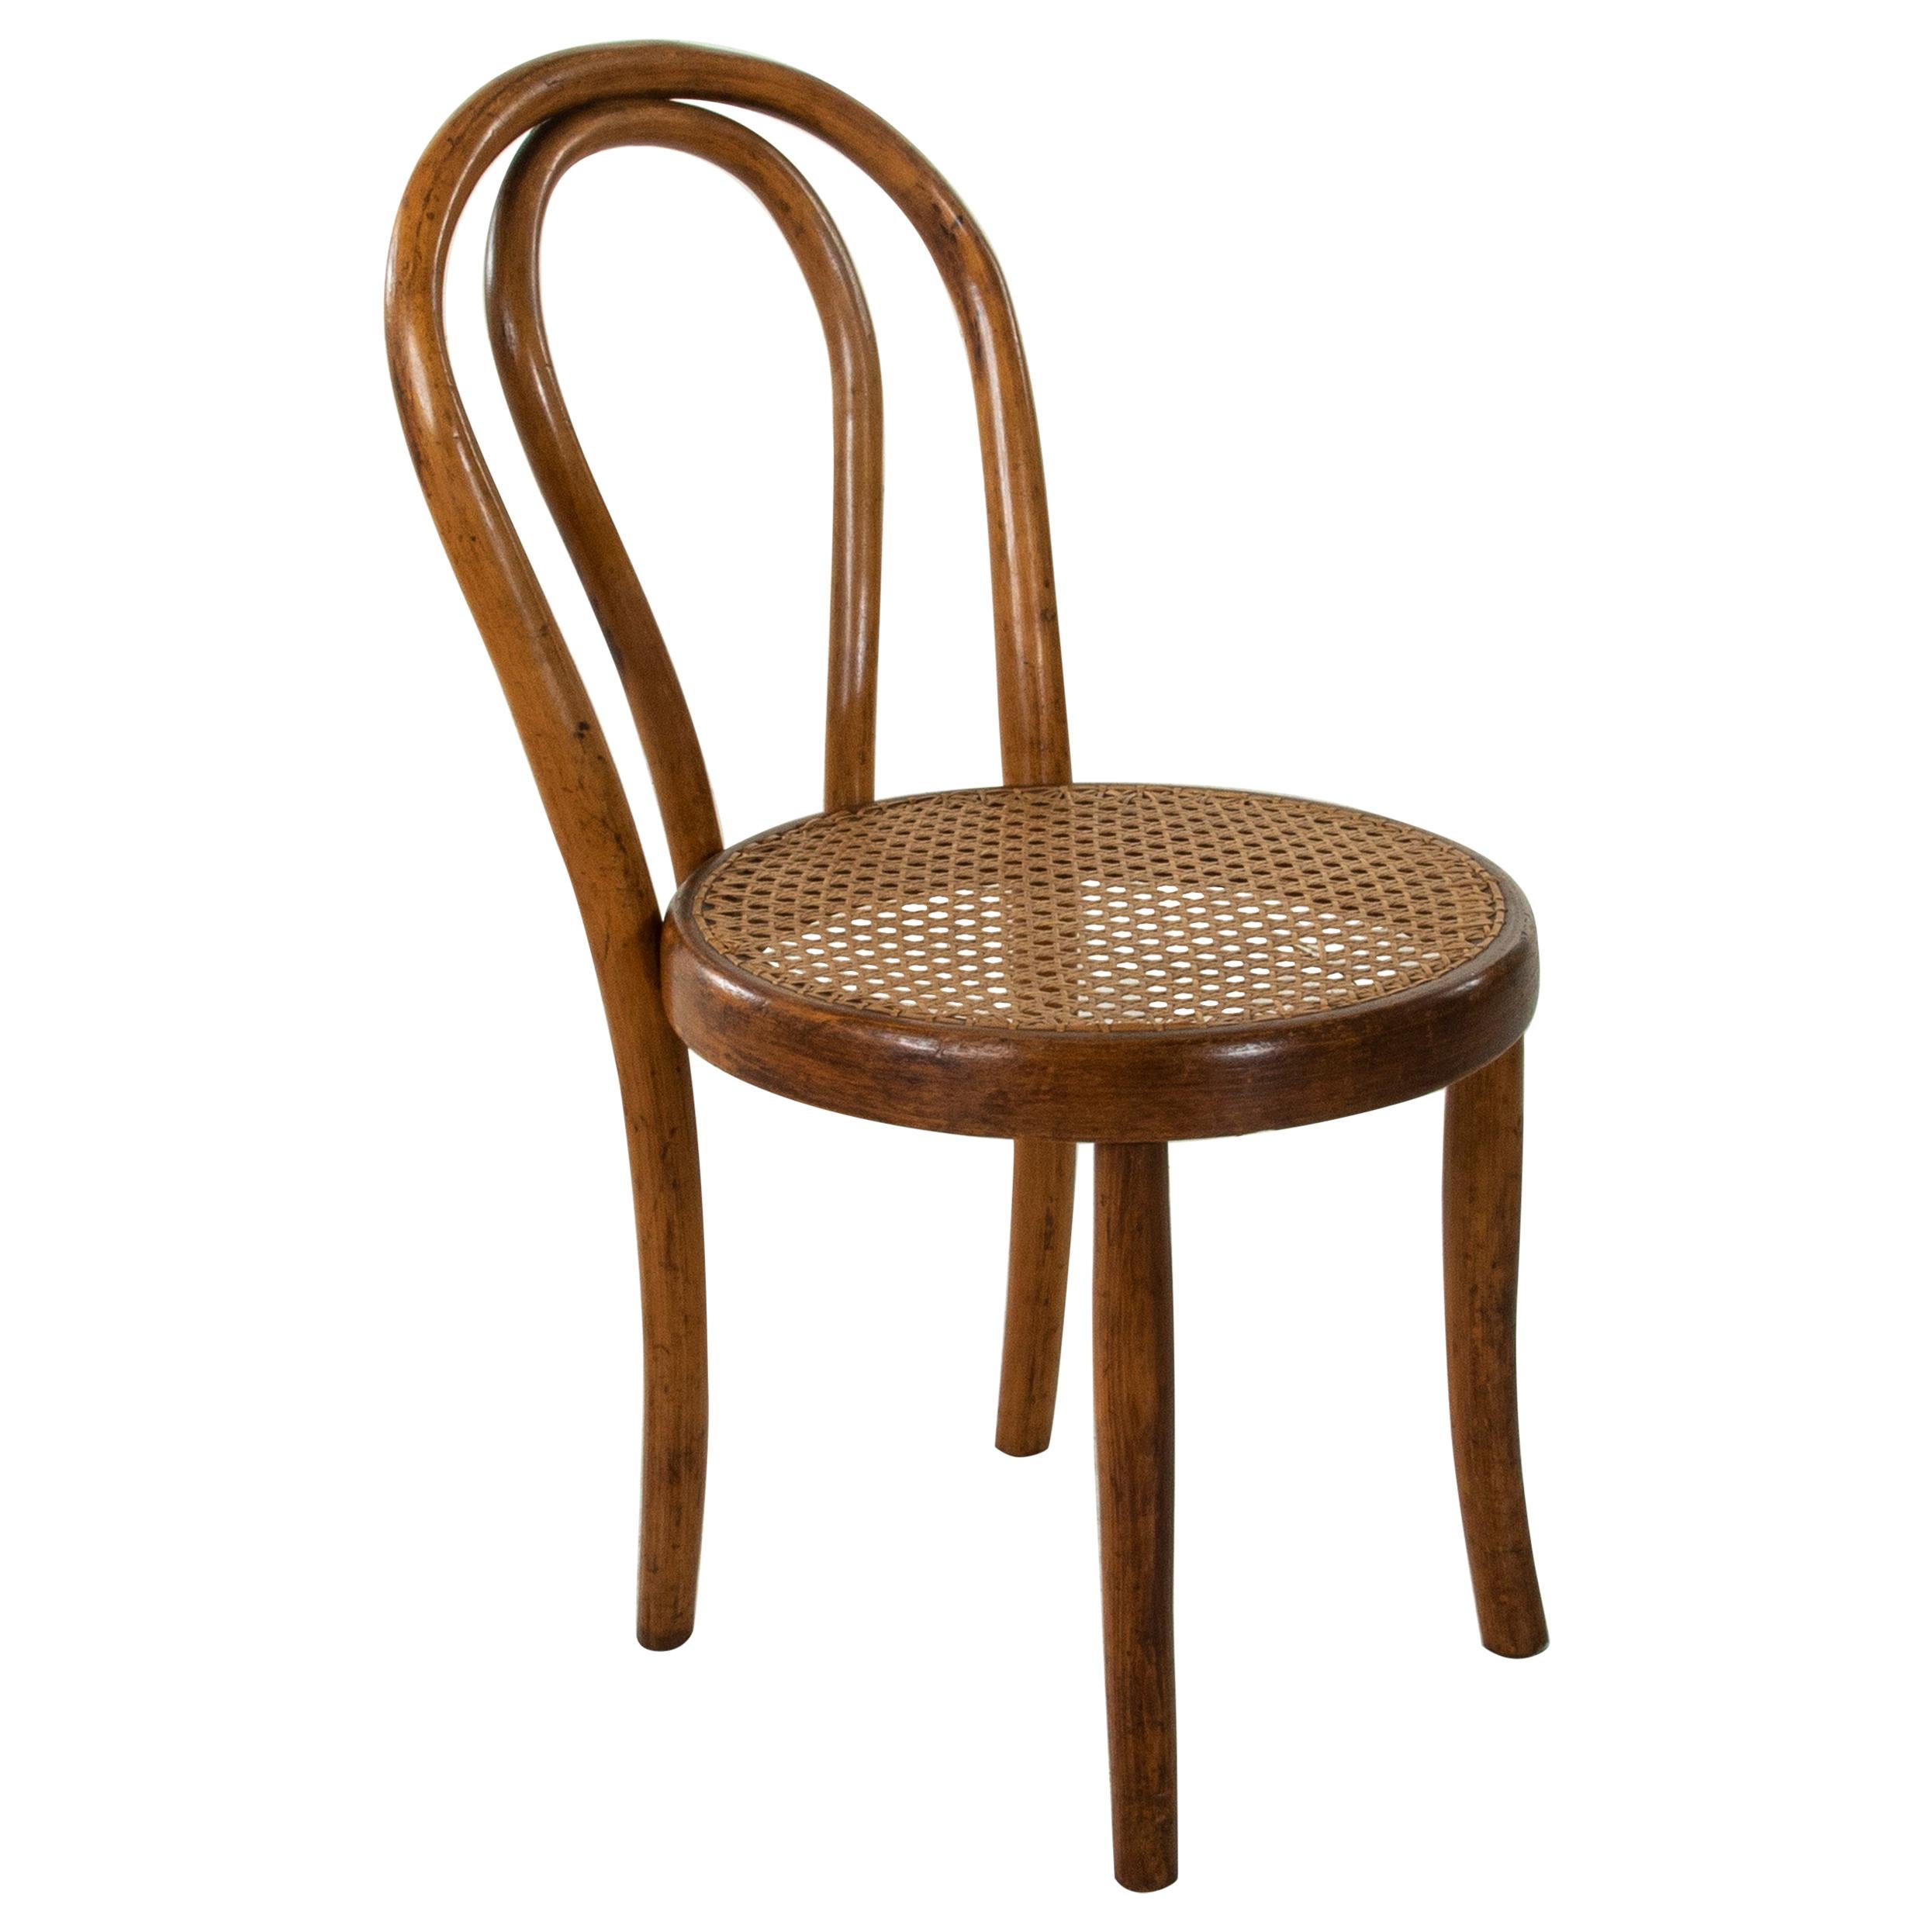 French Thonet Style Bentwood Child's Chair with Caned Seat, circa 1900, Fischel